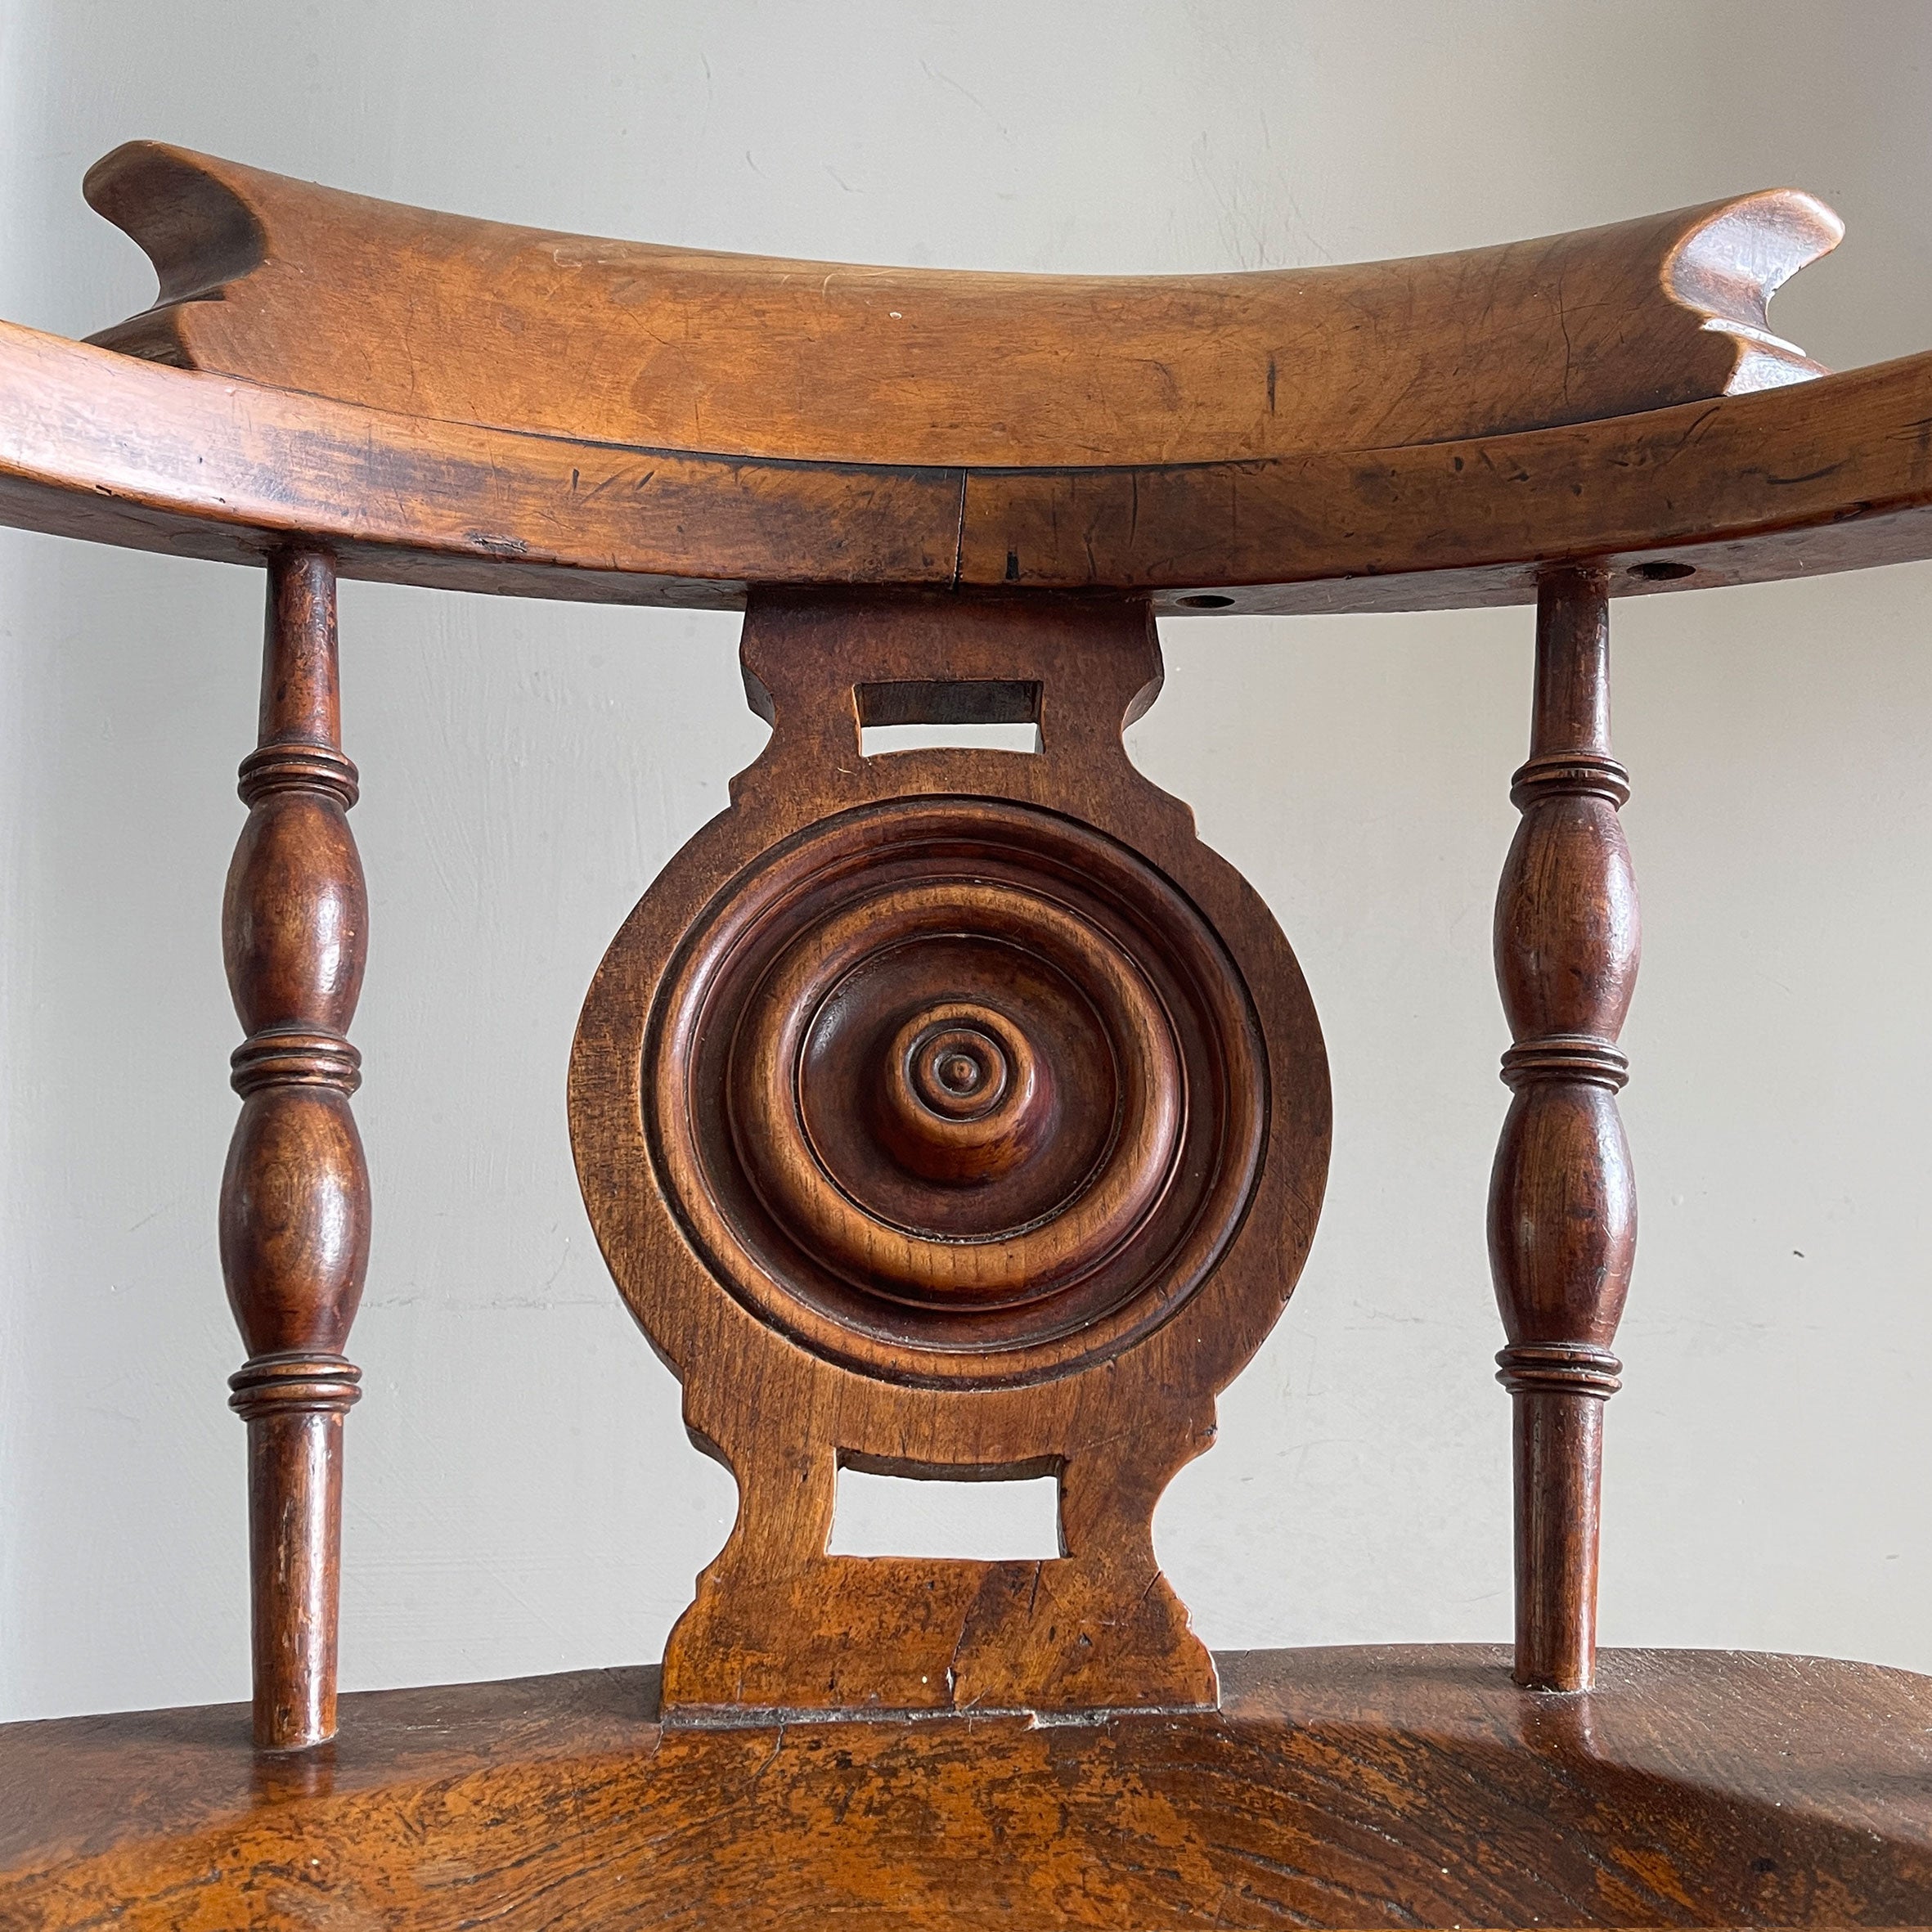 A sturdy, Elm and Yew wood Smoker's Bow.Great colour with superb wear to the arms and seat. A carved bullion support with nicely turned spindles and runners - SHOP NOW - www.intovintage.co.uk